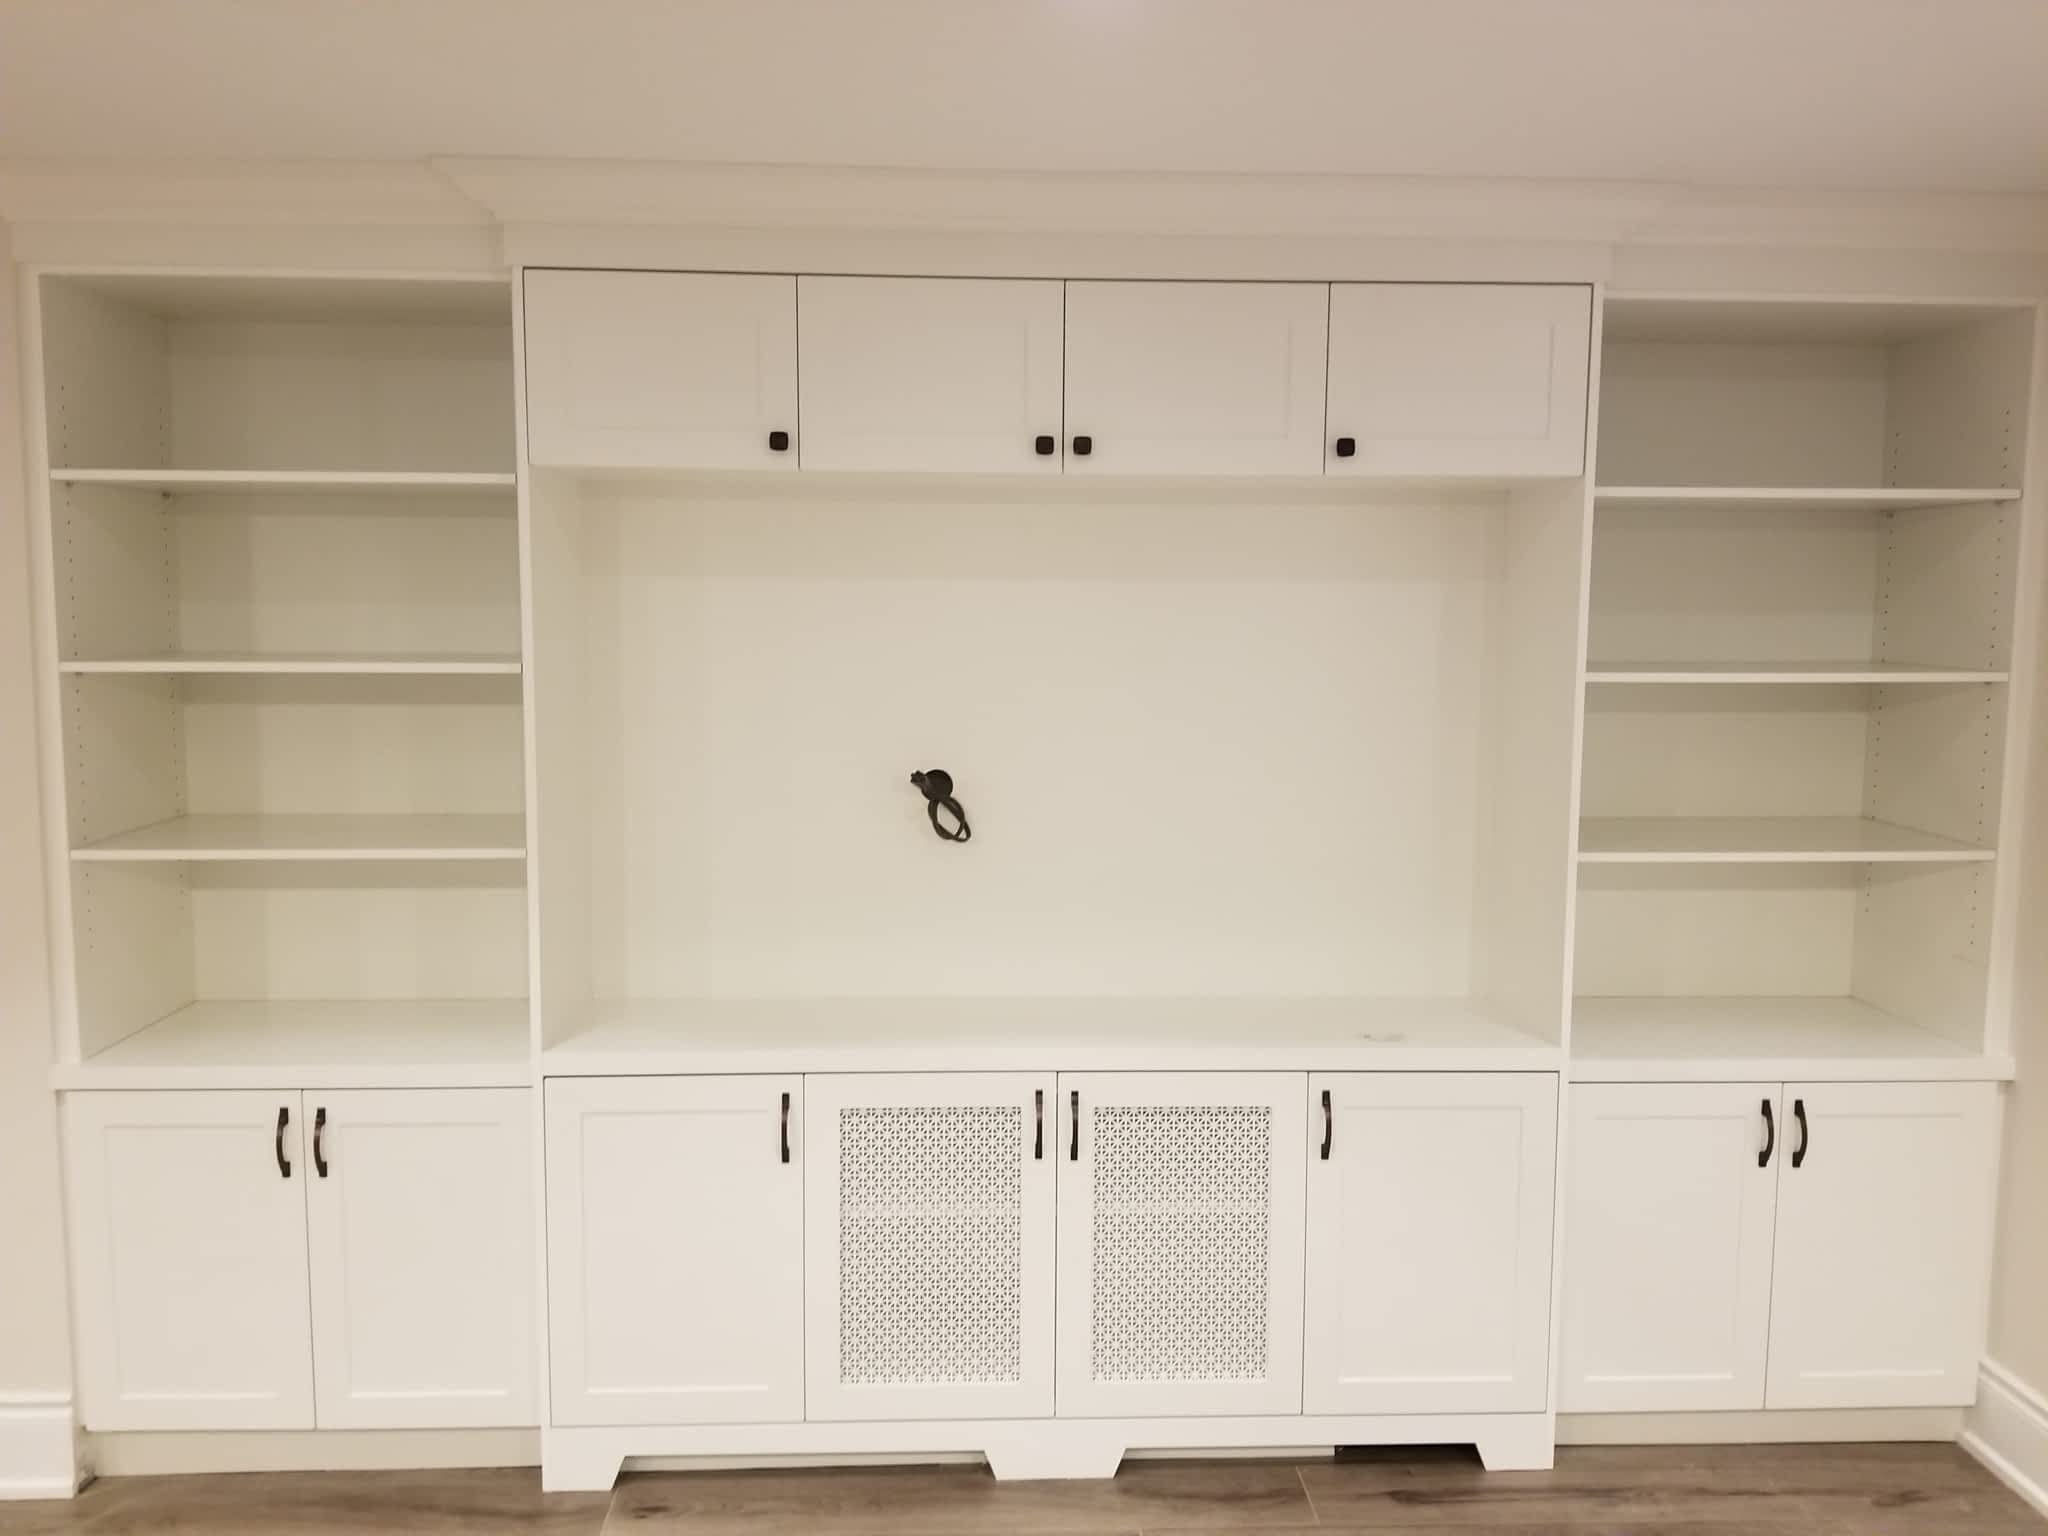 photo New Town Cabinetry